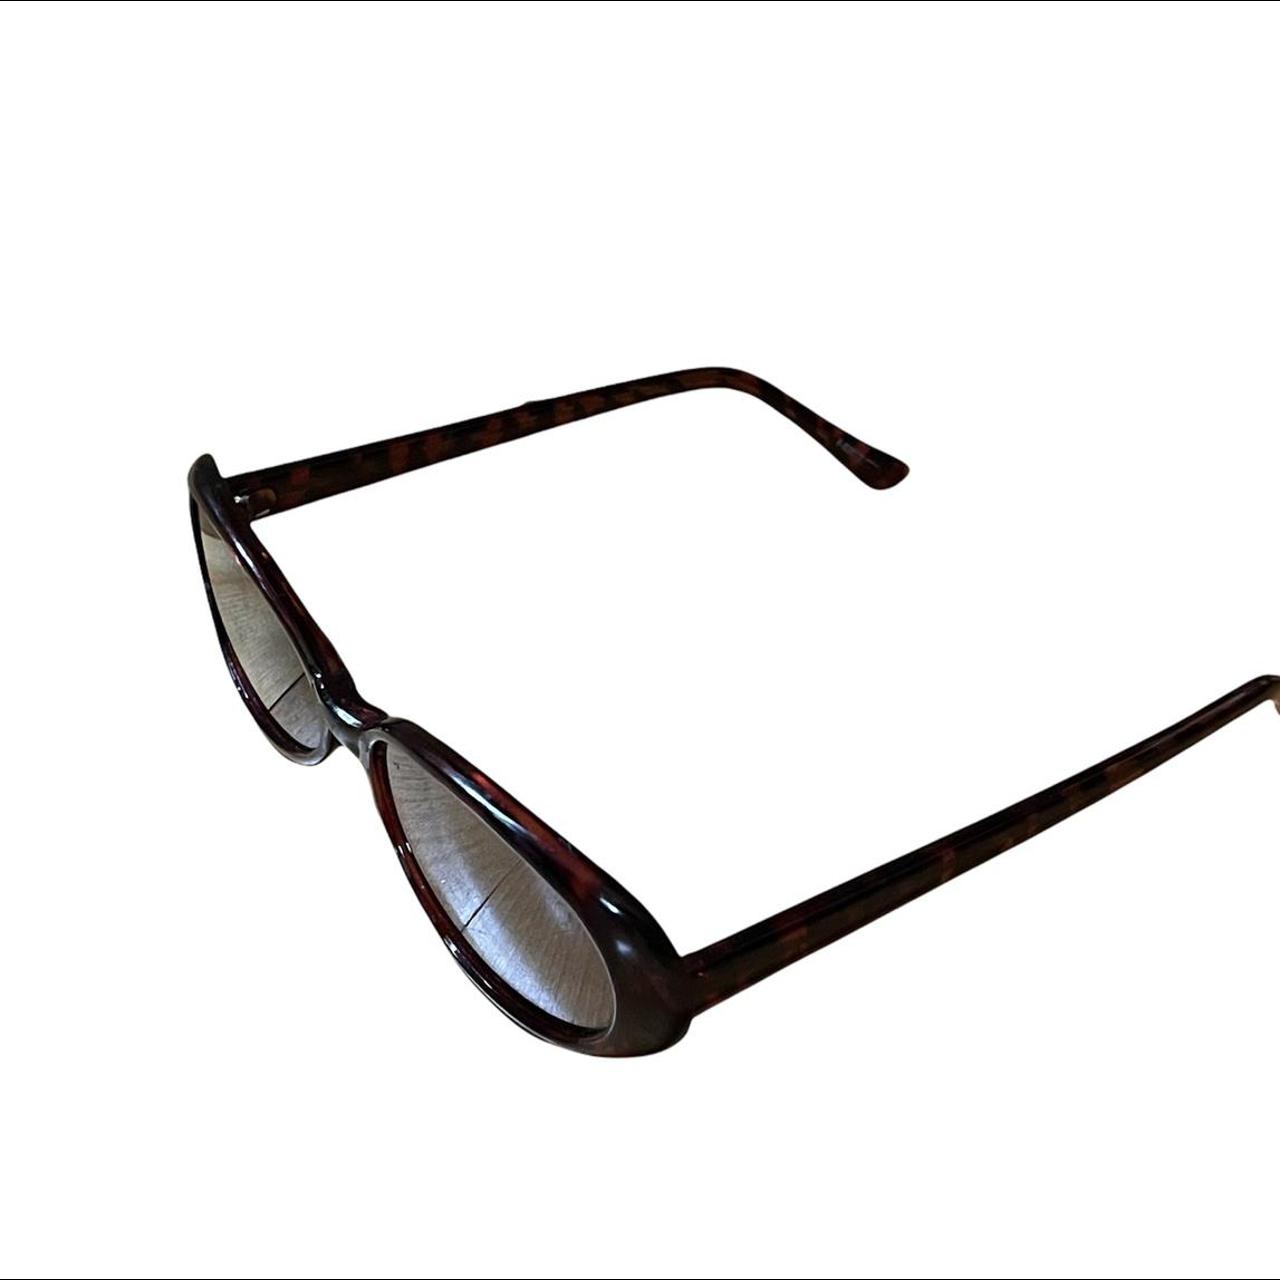 Product Image 2 - vintage oval sunglasses
no brand visible
model